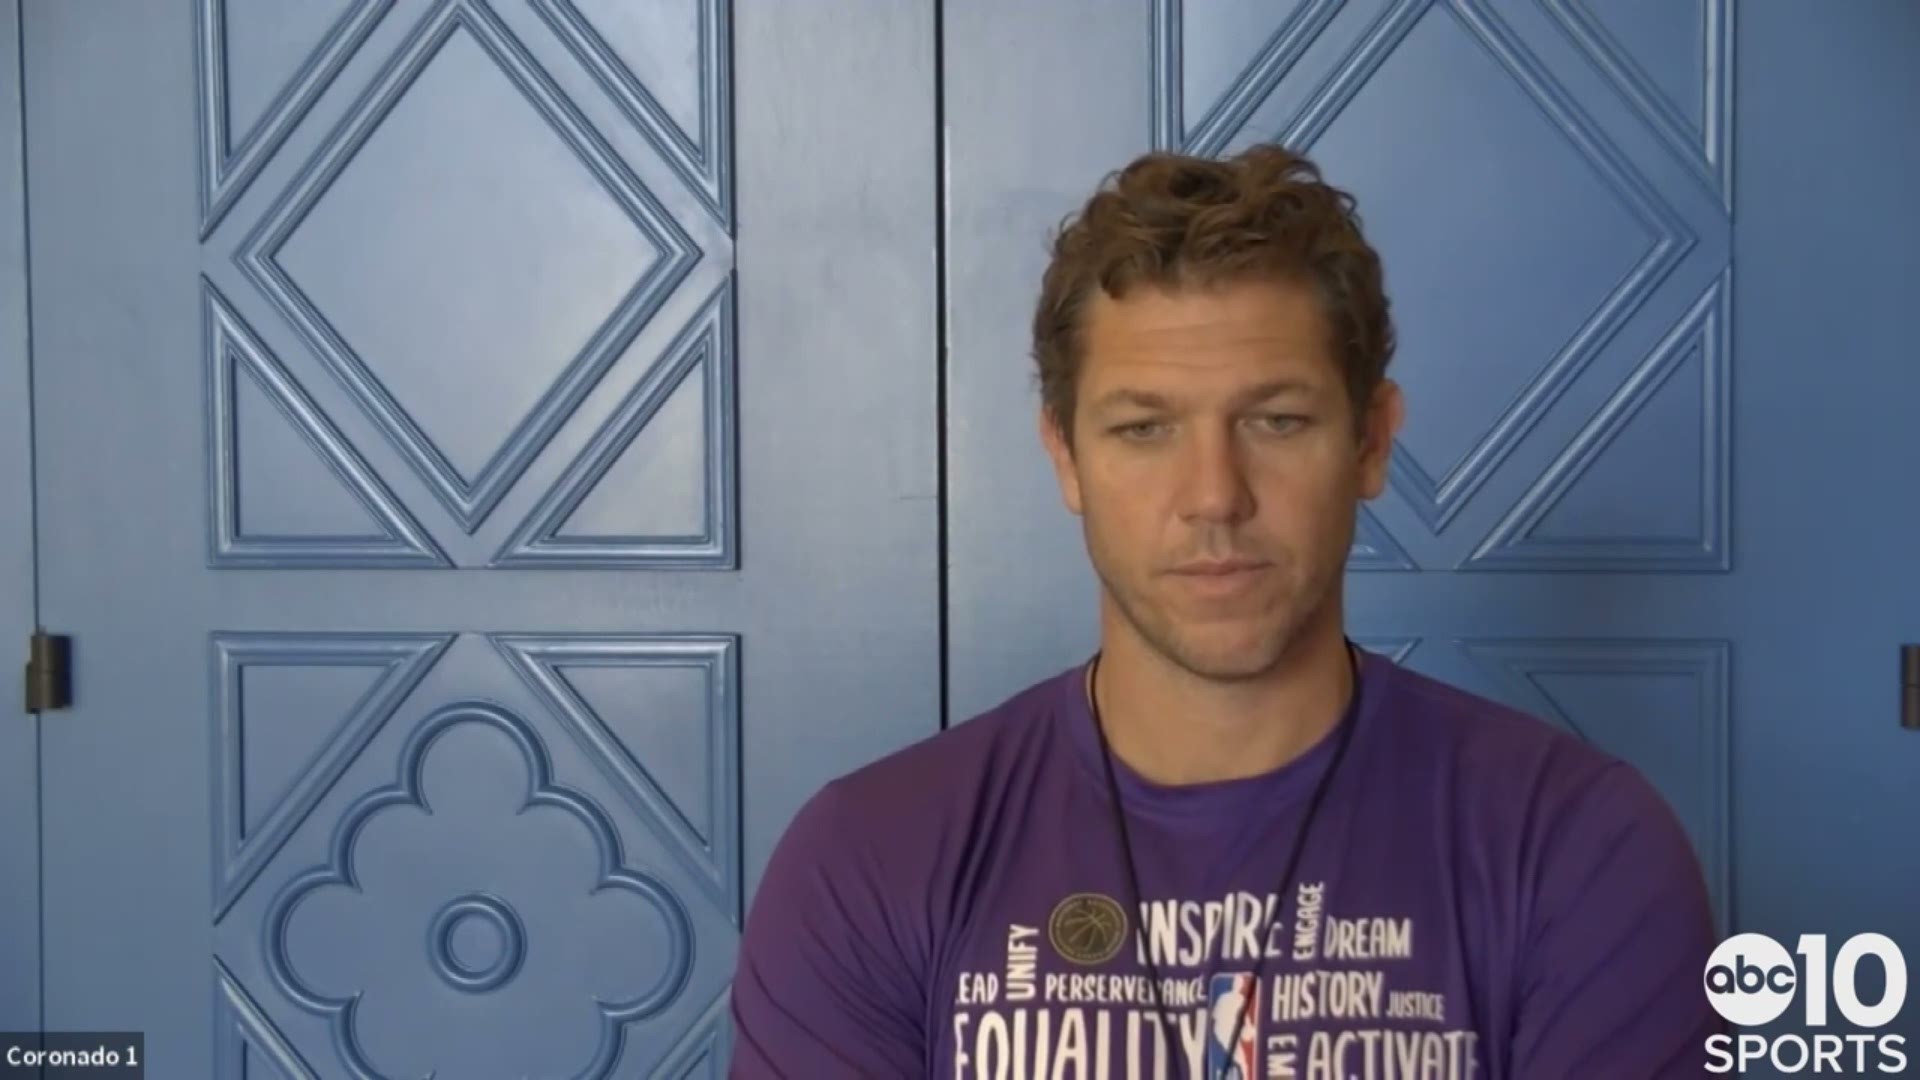 Kings coach Luke Walton provides updates to his team's training camp schedule in Orlando, the impact of Kent Bazemore & the importance of the team's mental health.